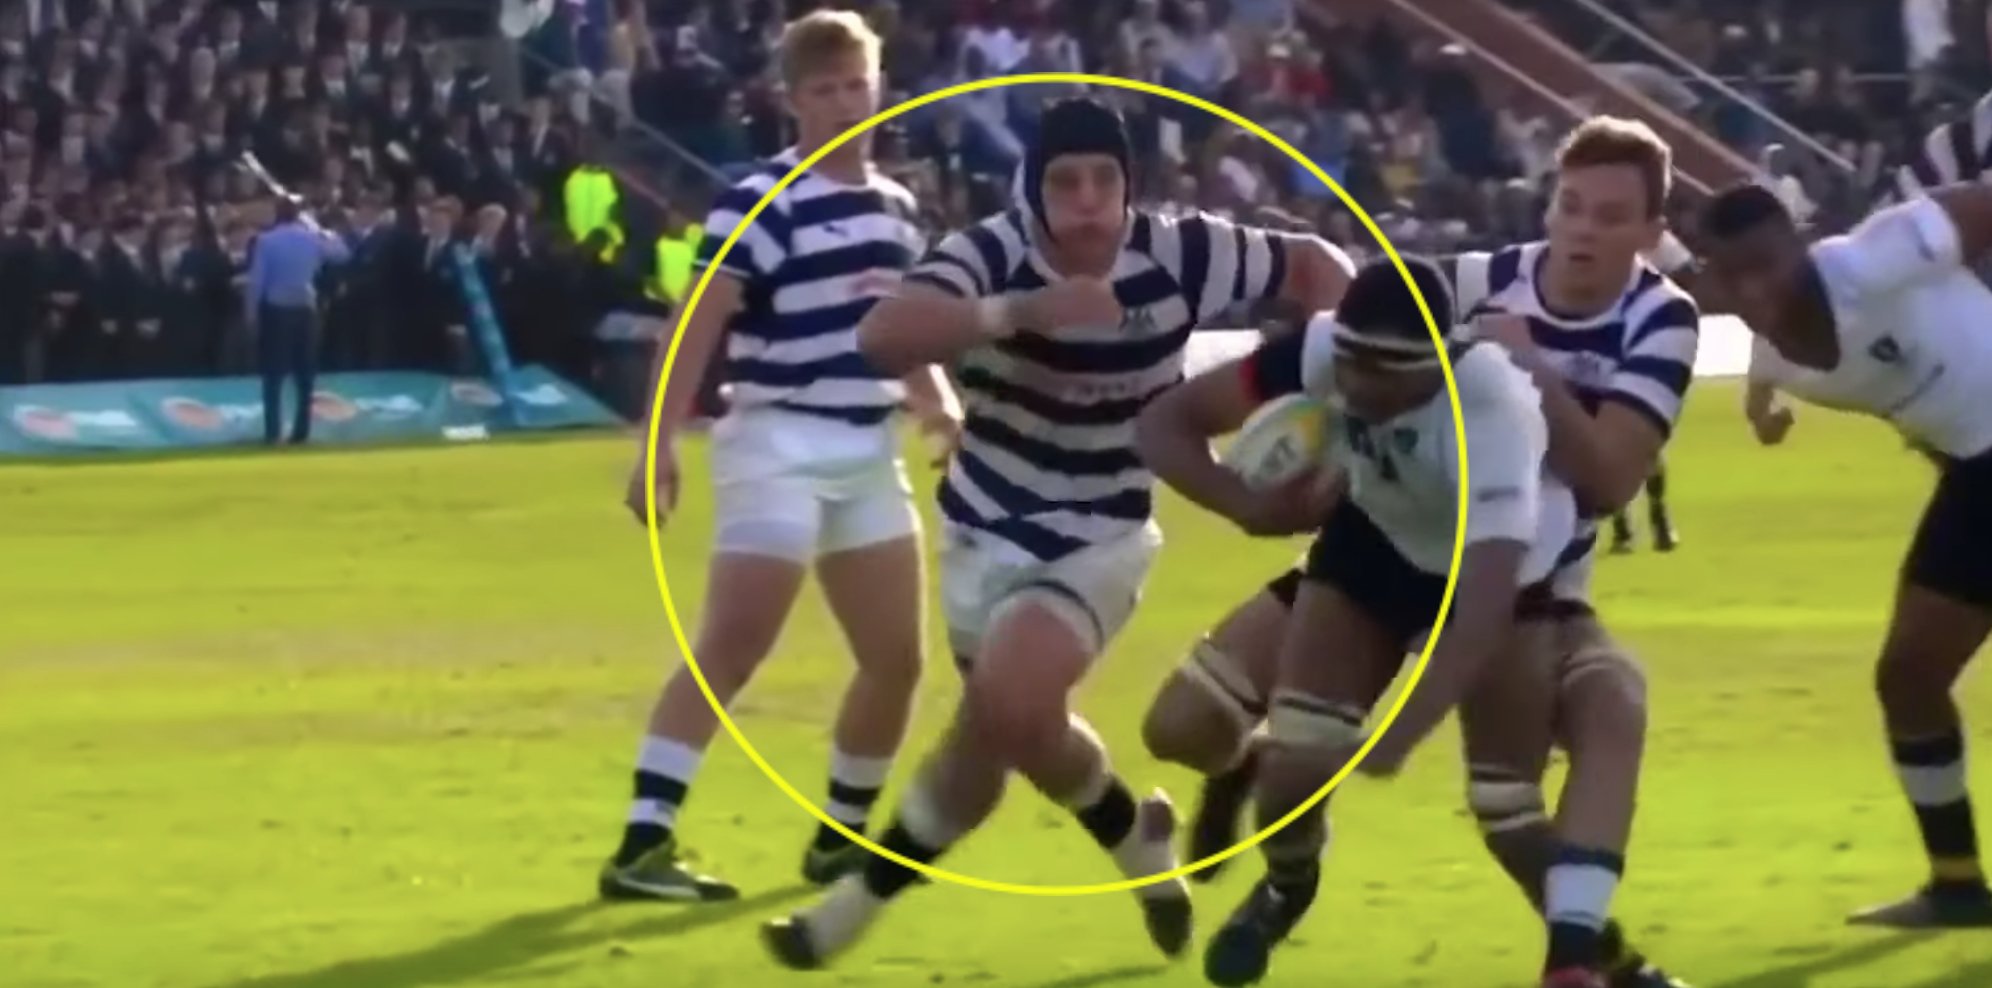 South Africa's Under 18 hooker is nicknamed "The Raging Bull" and it's clear to see why